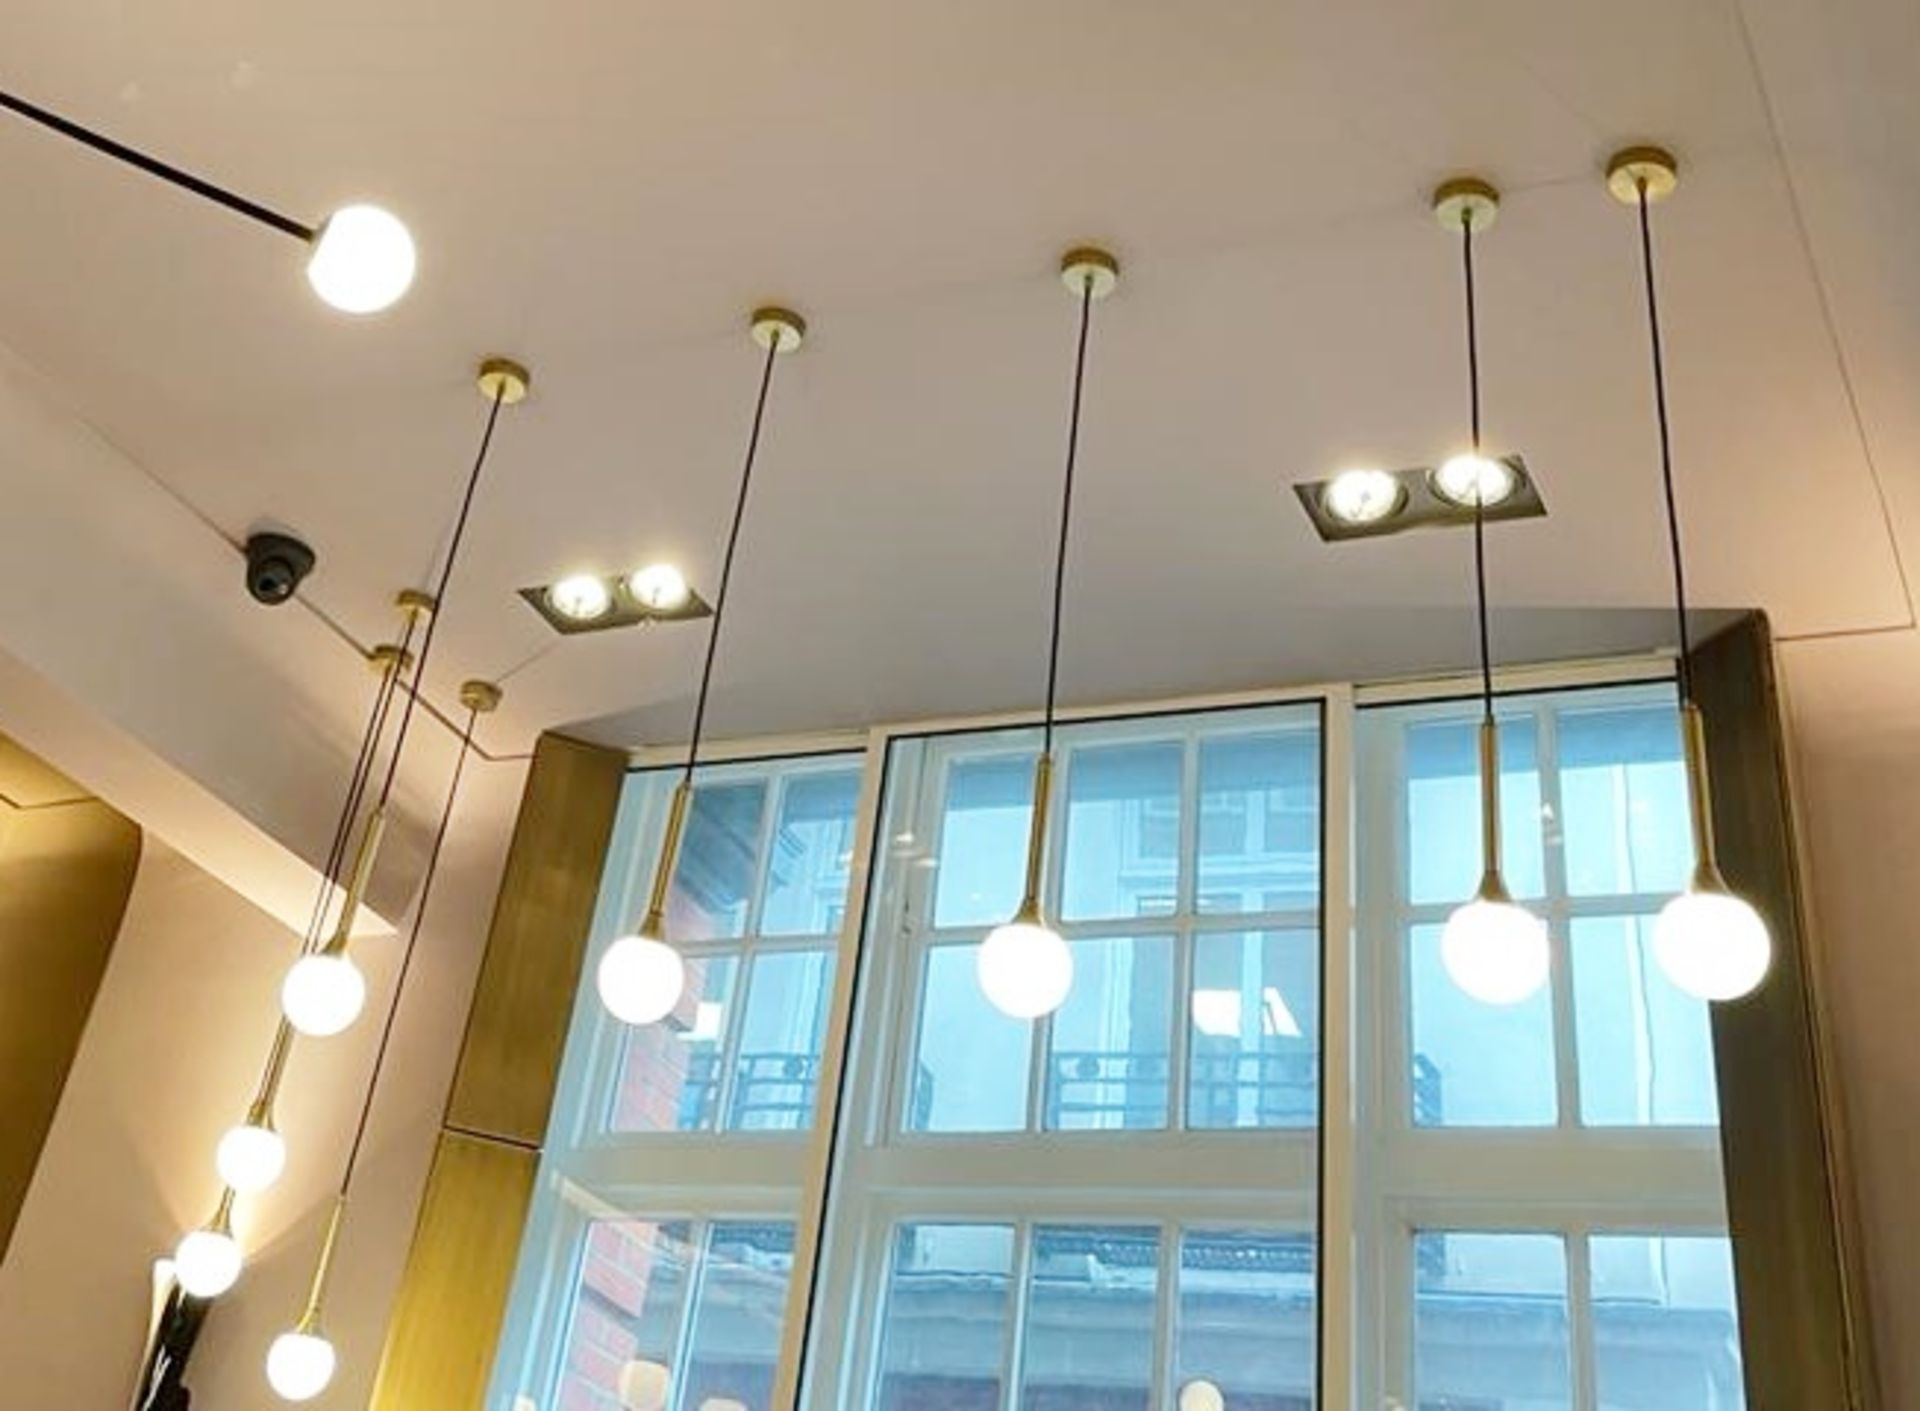 4 x Hand Made 'Petite' Suspension LED Ceiling Lights By Delight Lighting - Image 10 of 12